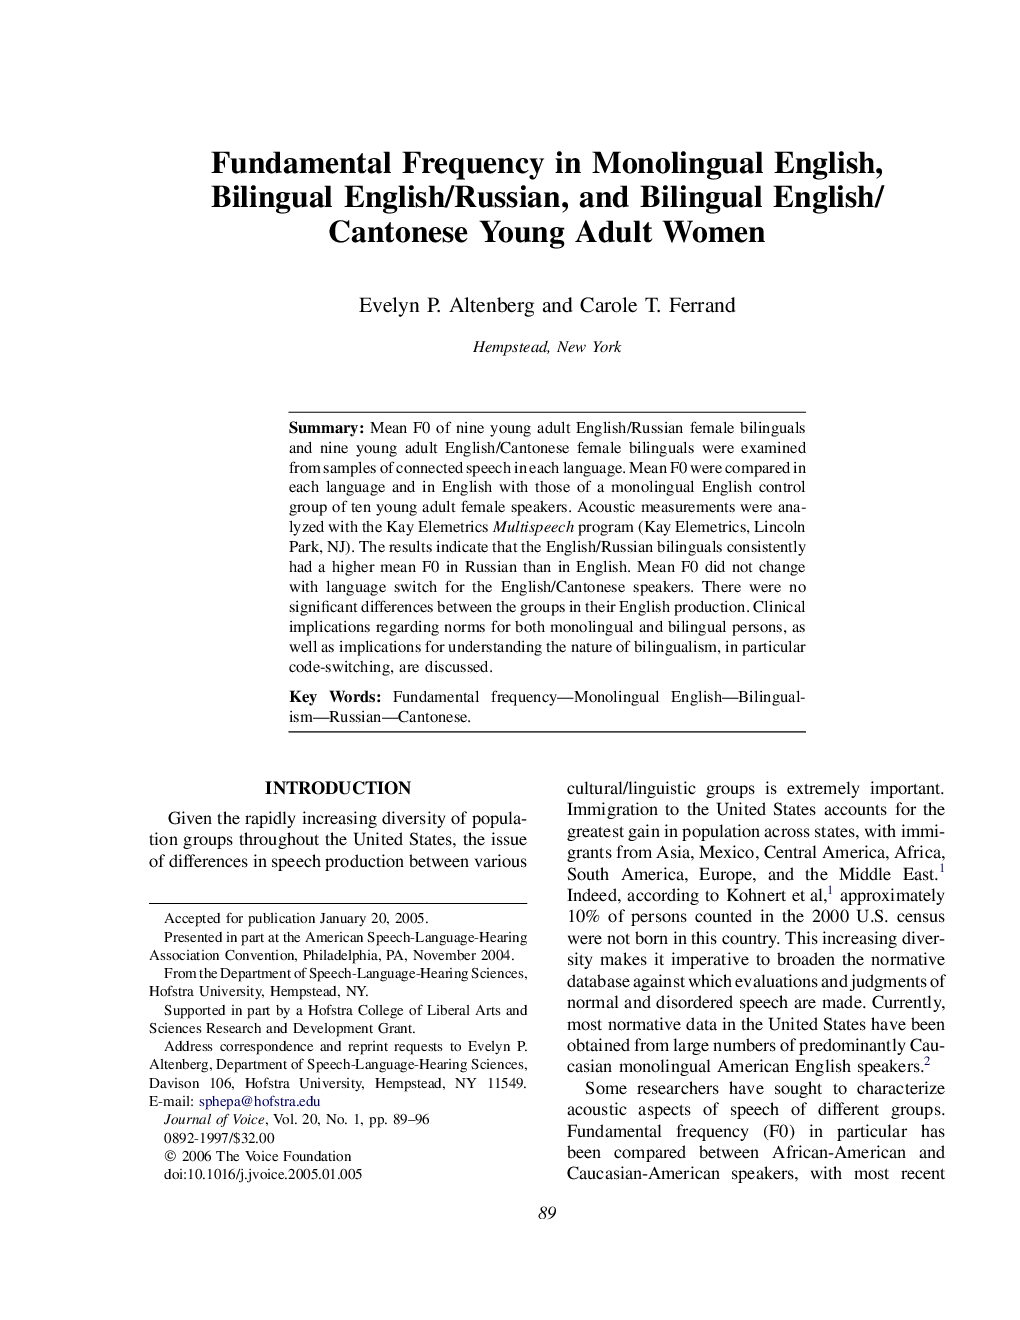 Fundamental Frequency in Monolingual English, Bilingual English/Russian, and Bilingual English/Cantonese Young Adult Women 